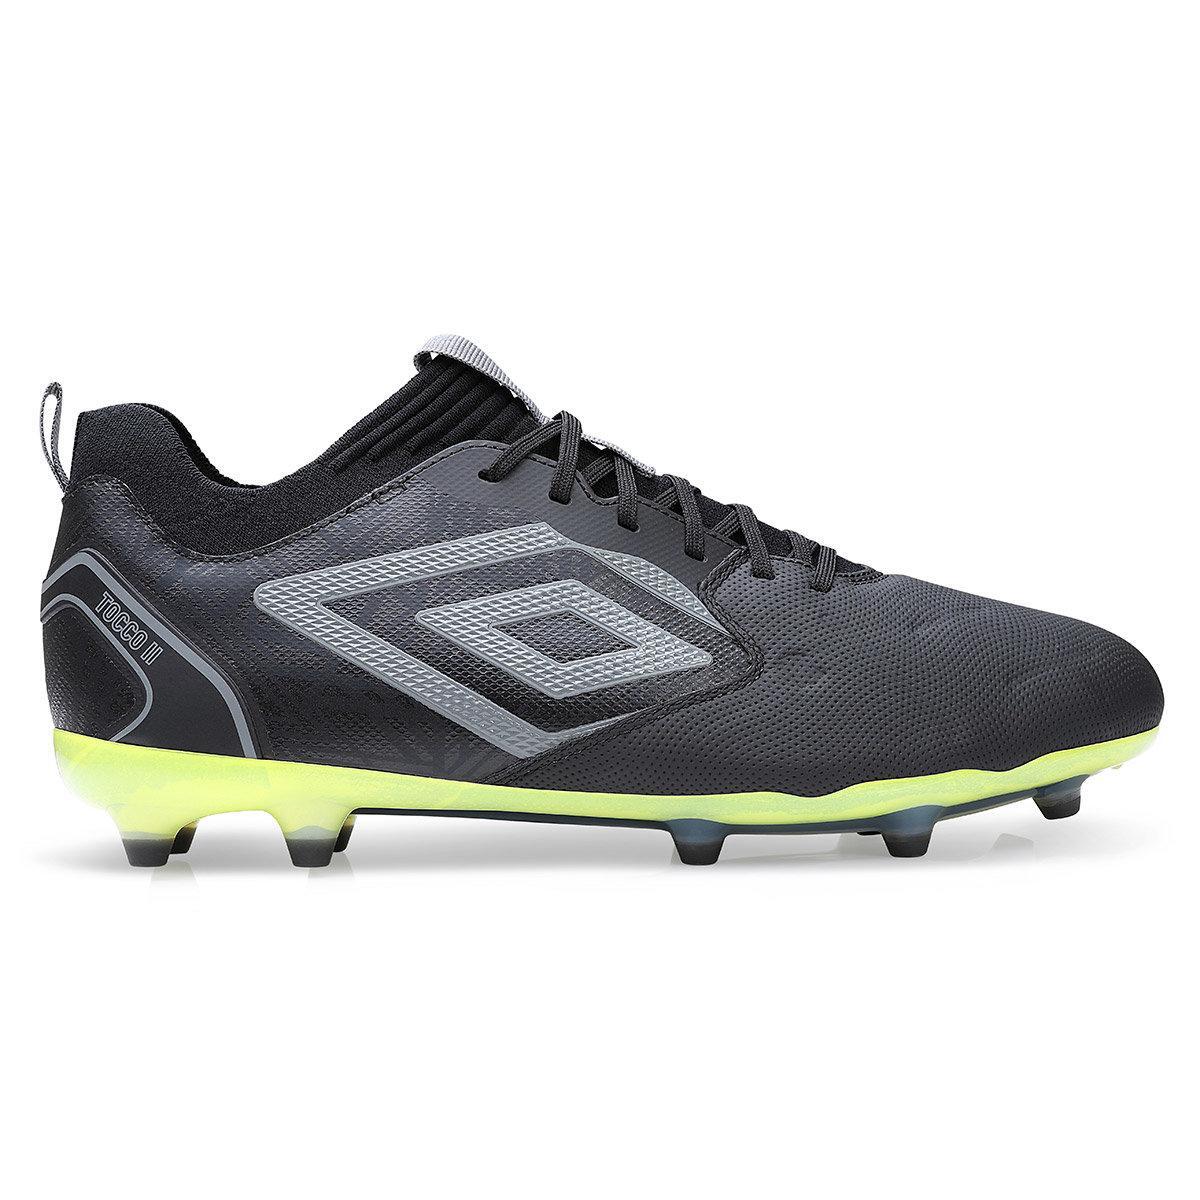 UMBRO Mens Tocco 2 Pro Leather Firm Ground Boots (Black/Quiet Shade Grey/Limeade